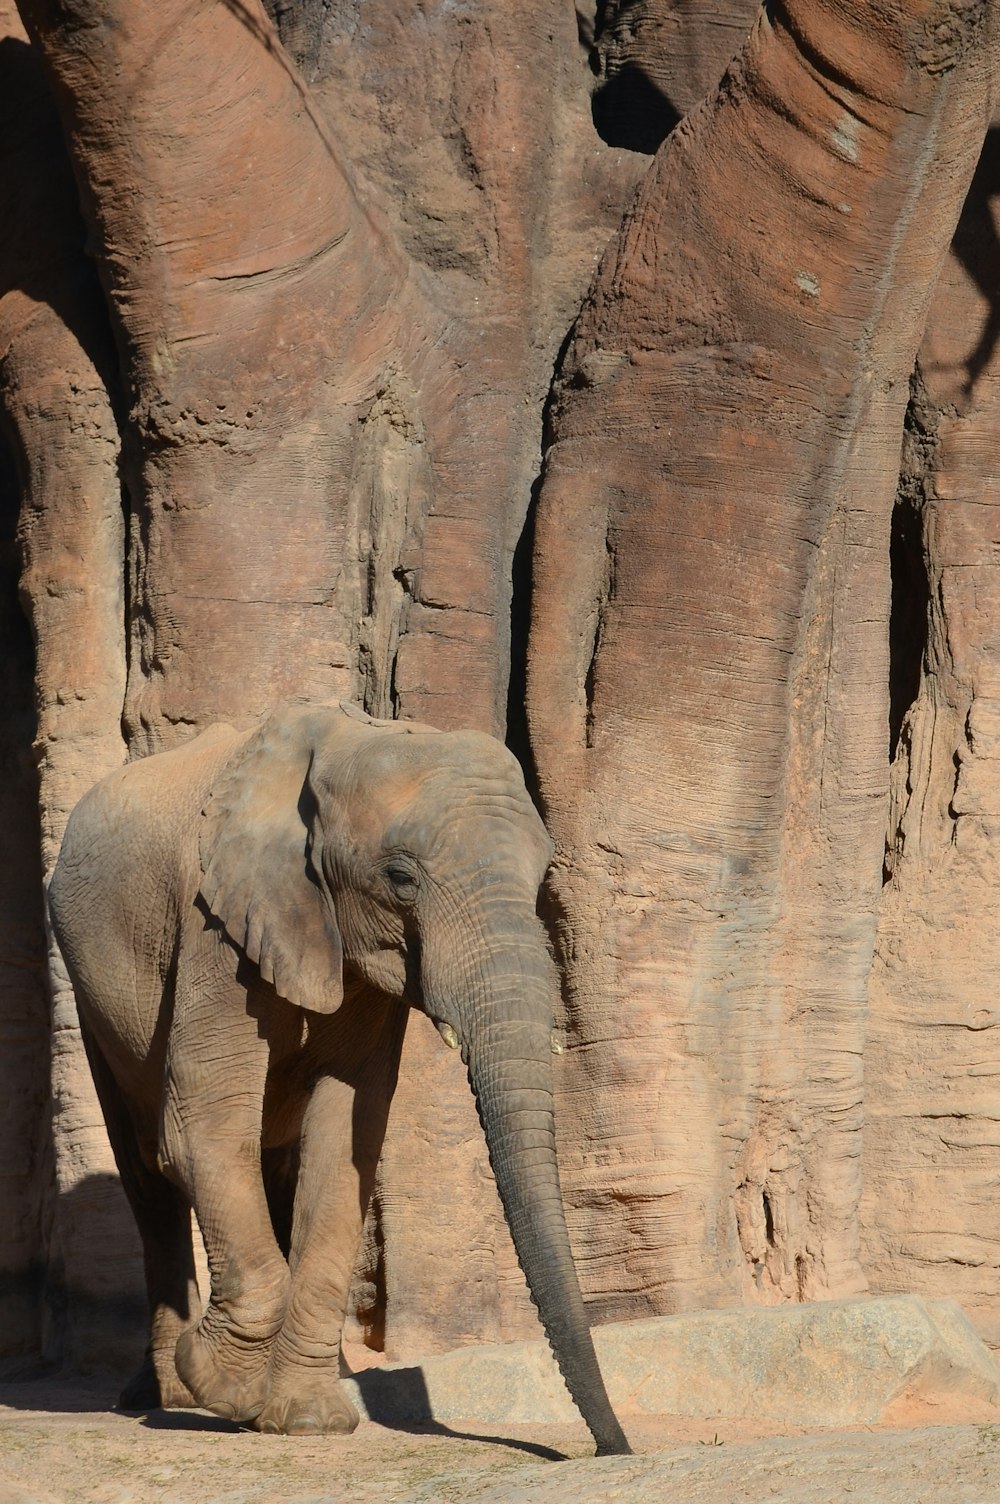 an elephant standing in front of a rock formation